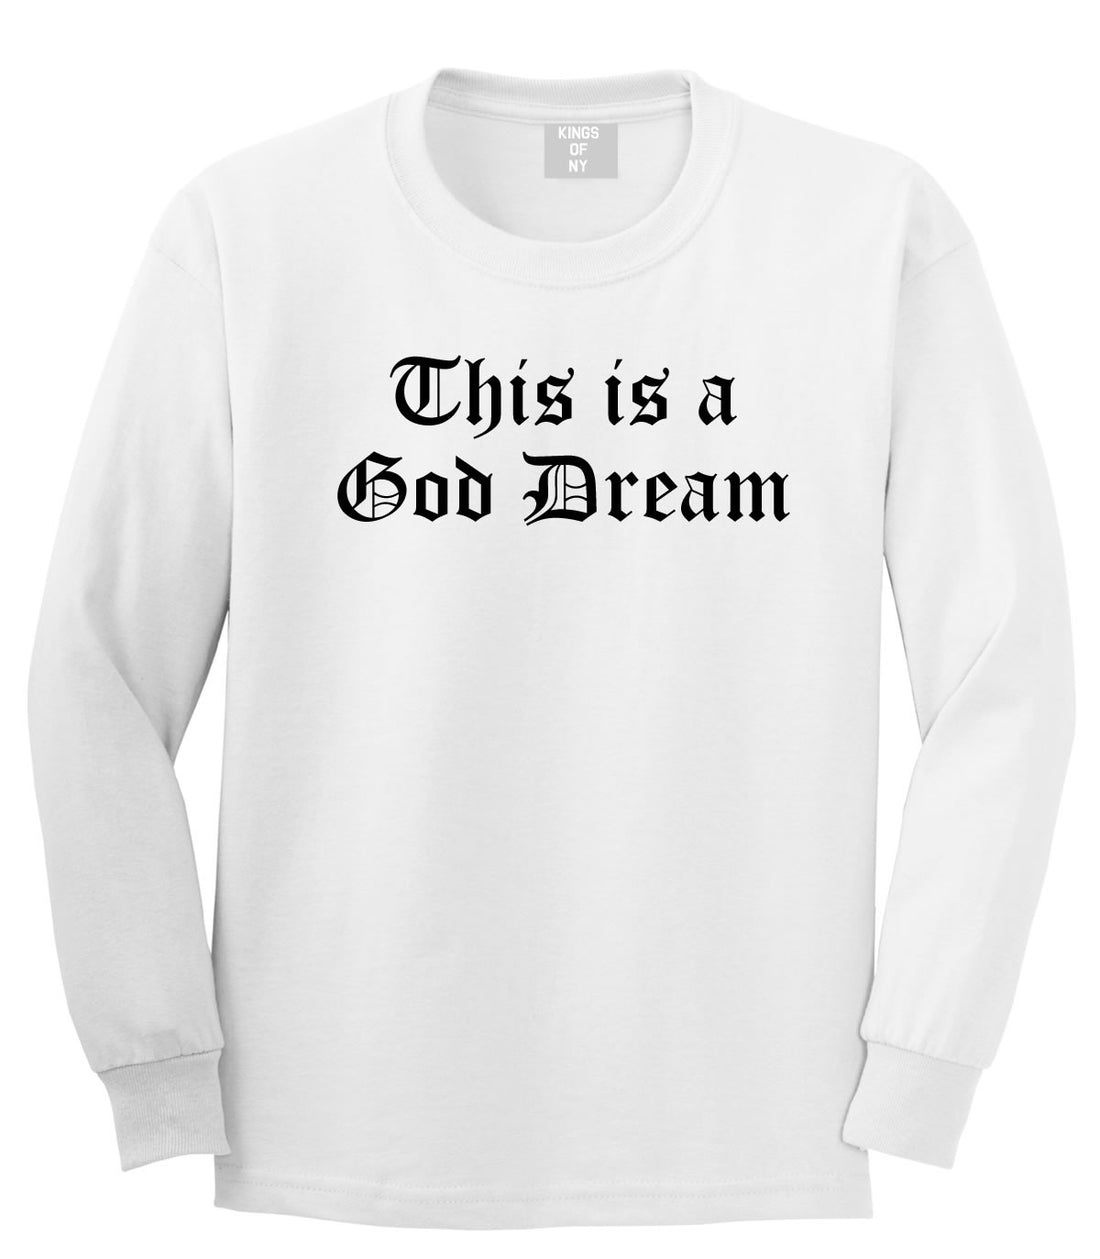 This Is A God Dream Gothic Old English Long Sleeve T-Shirt in White By Kings Of NY